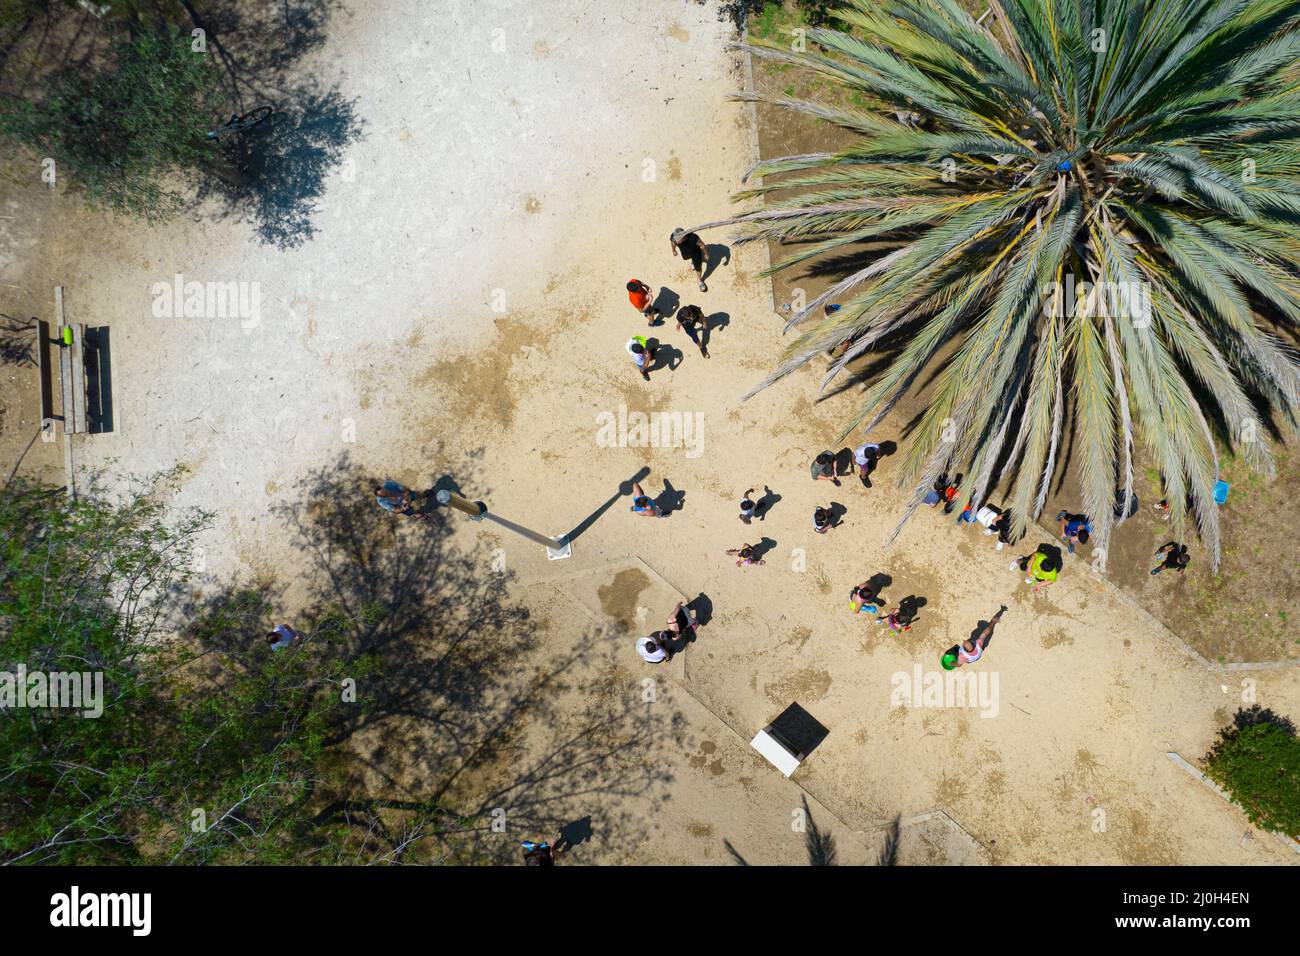 Unrecognised children playing with water in the park. Aerial view of people having fun Stock Photo